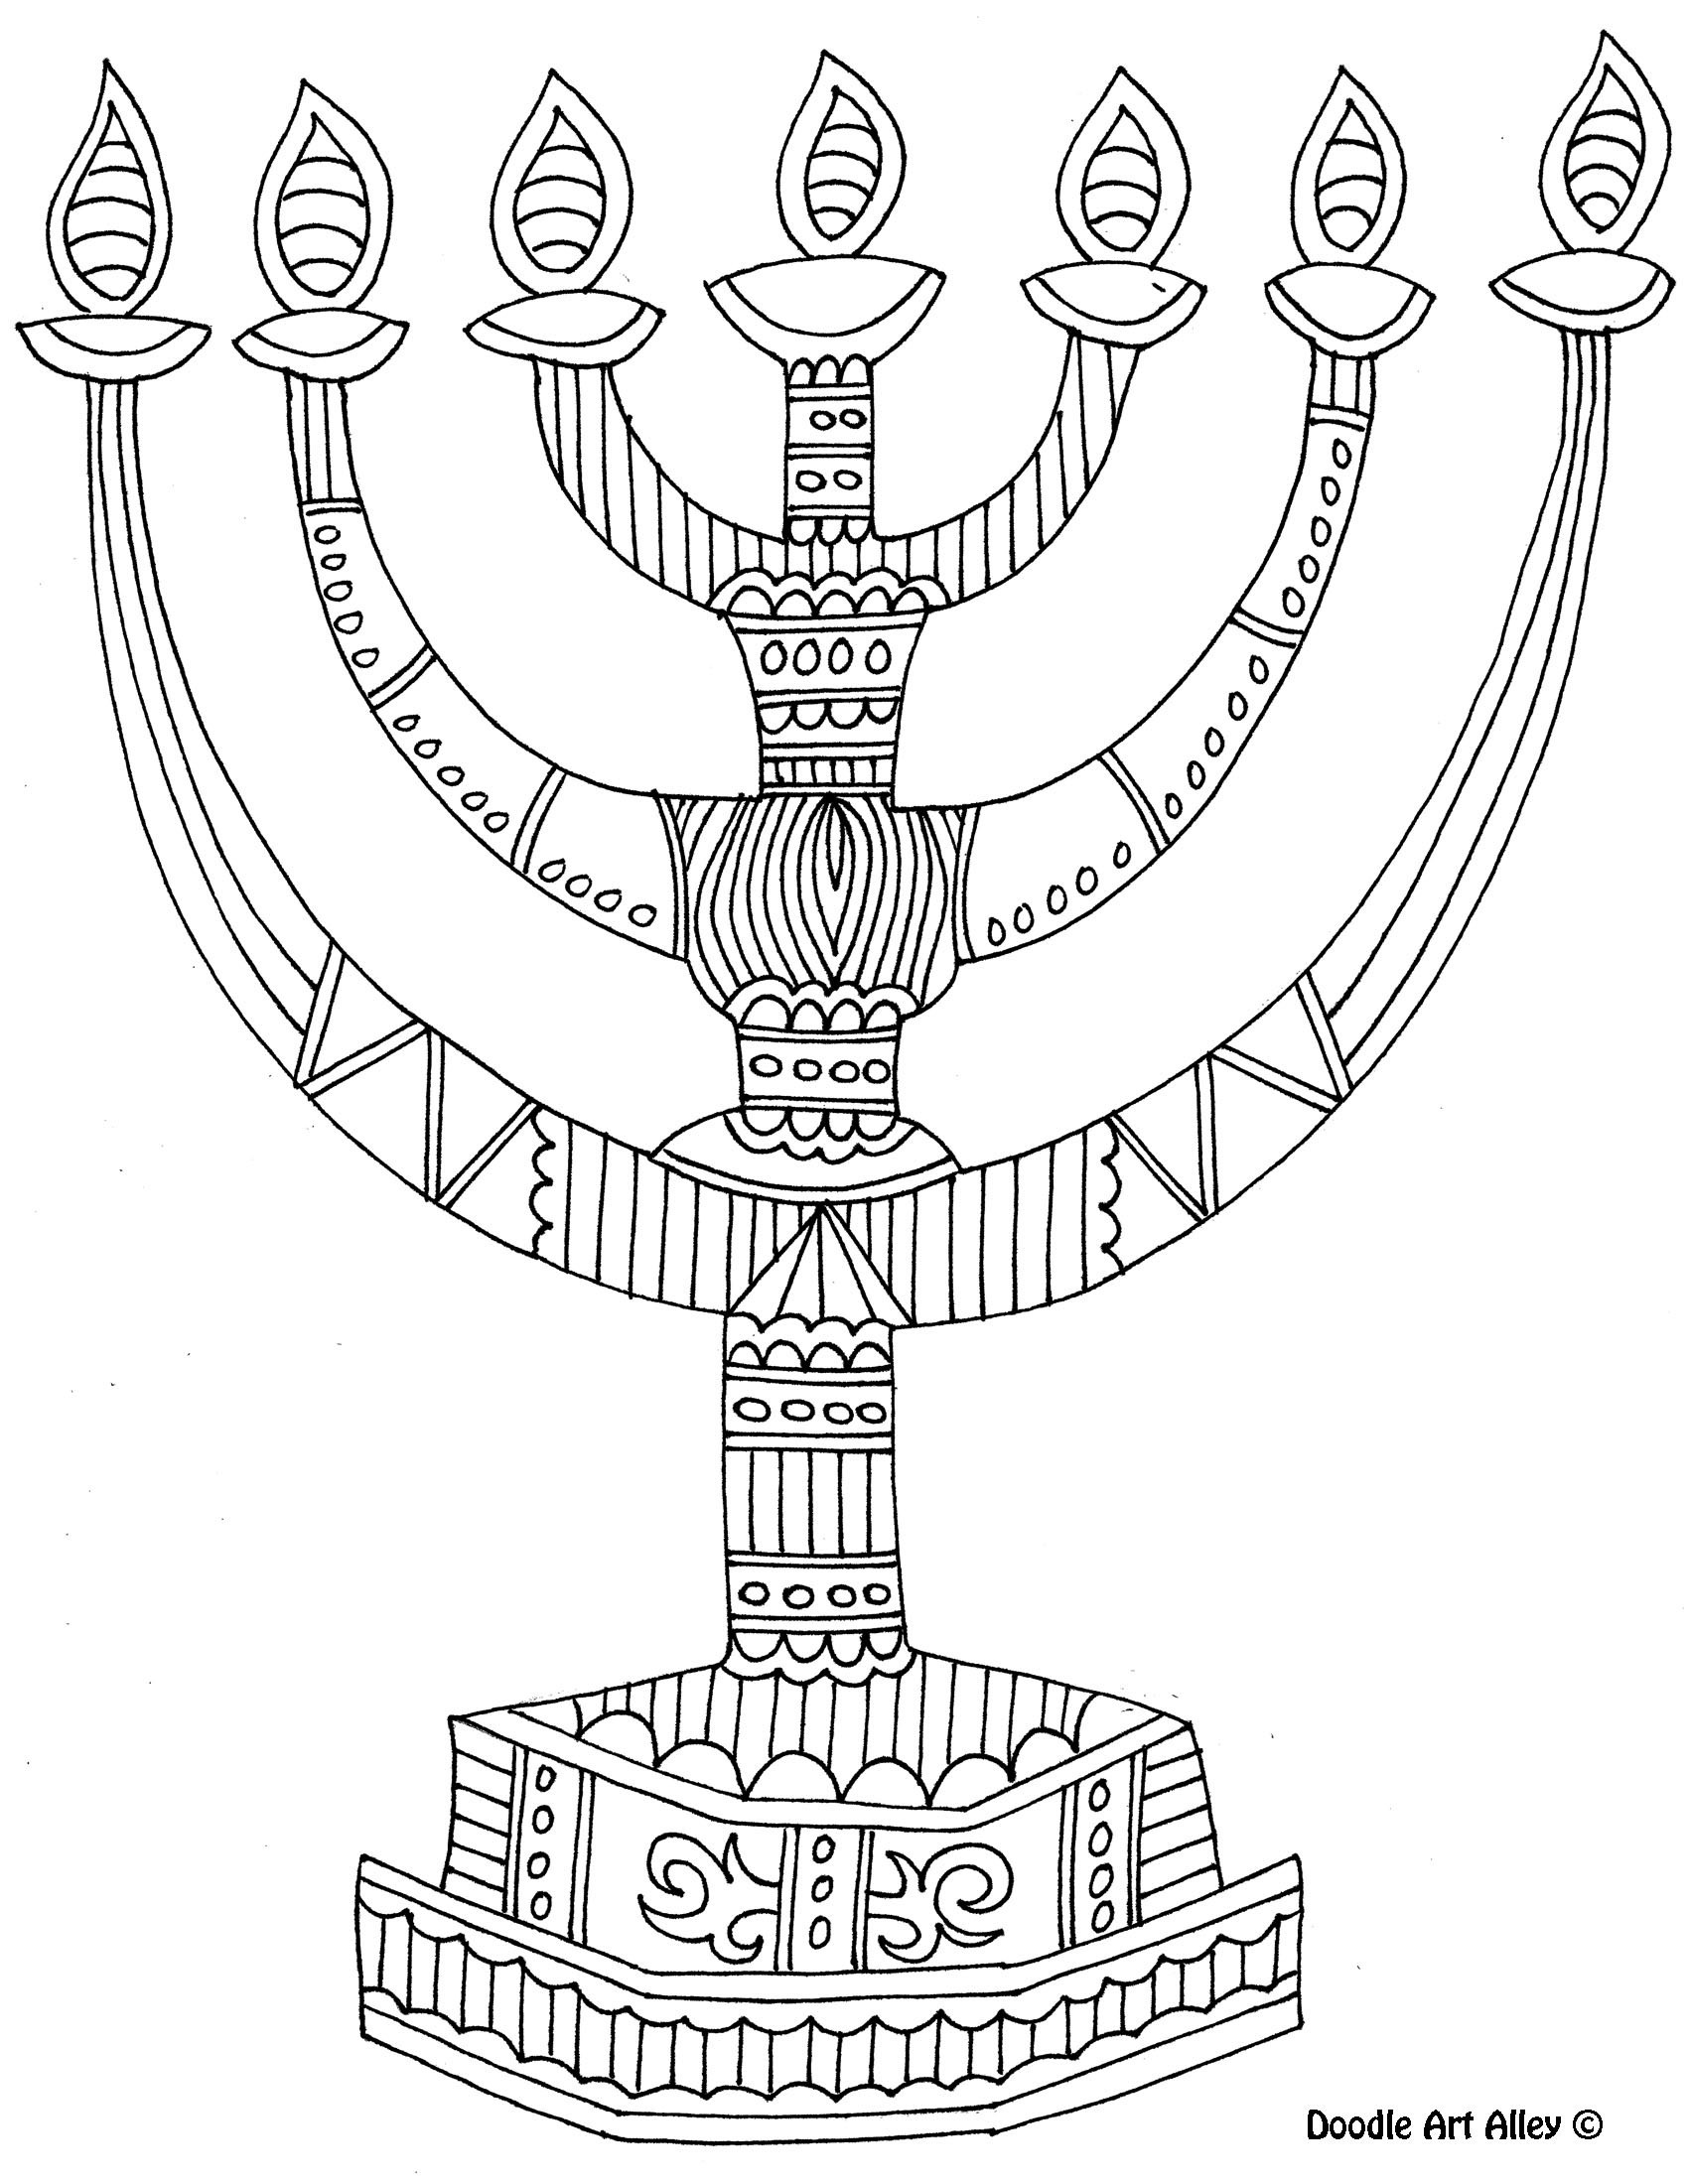 Menorah Coloring Pages
 8 of the best most artful Hanukkah coloring pages